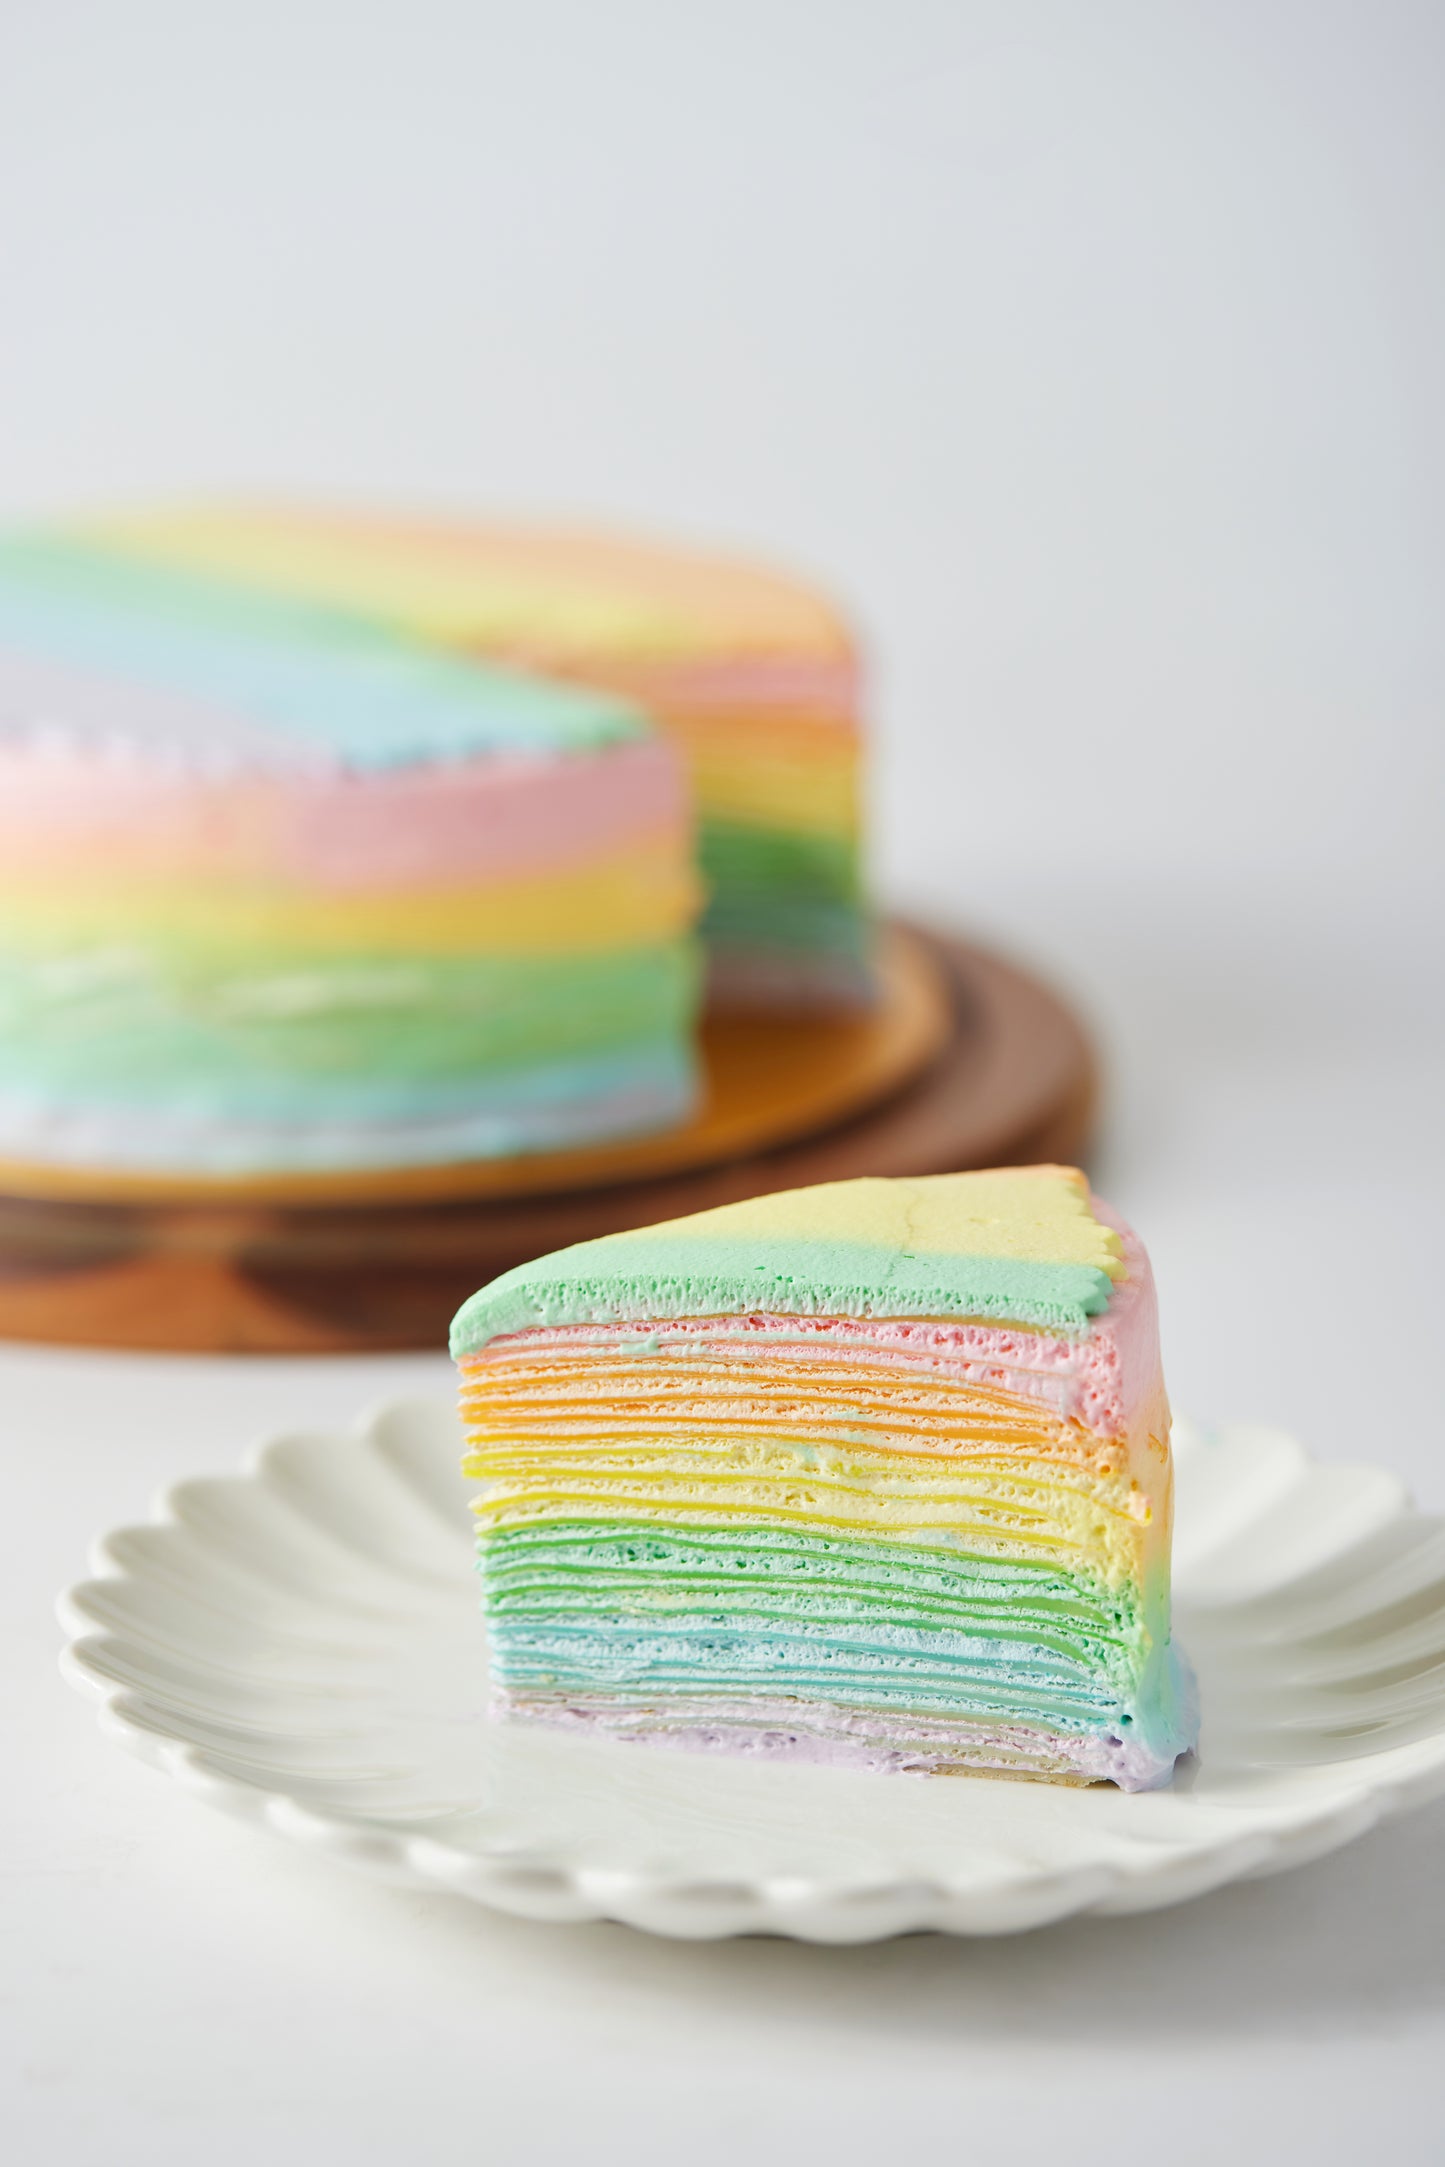 Rainbow vanilla crepe cake 6" (with mix sauce)  suitable for 6-8 pax